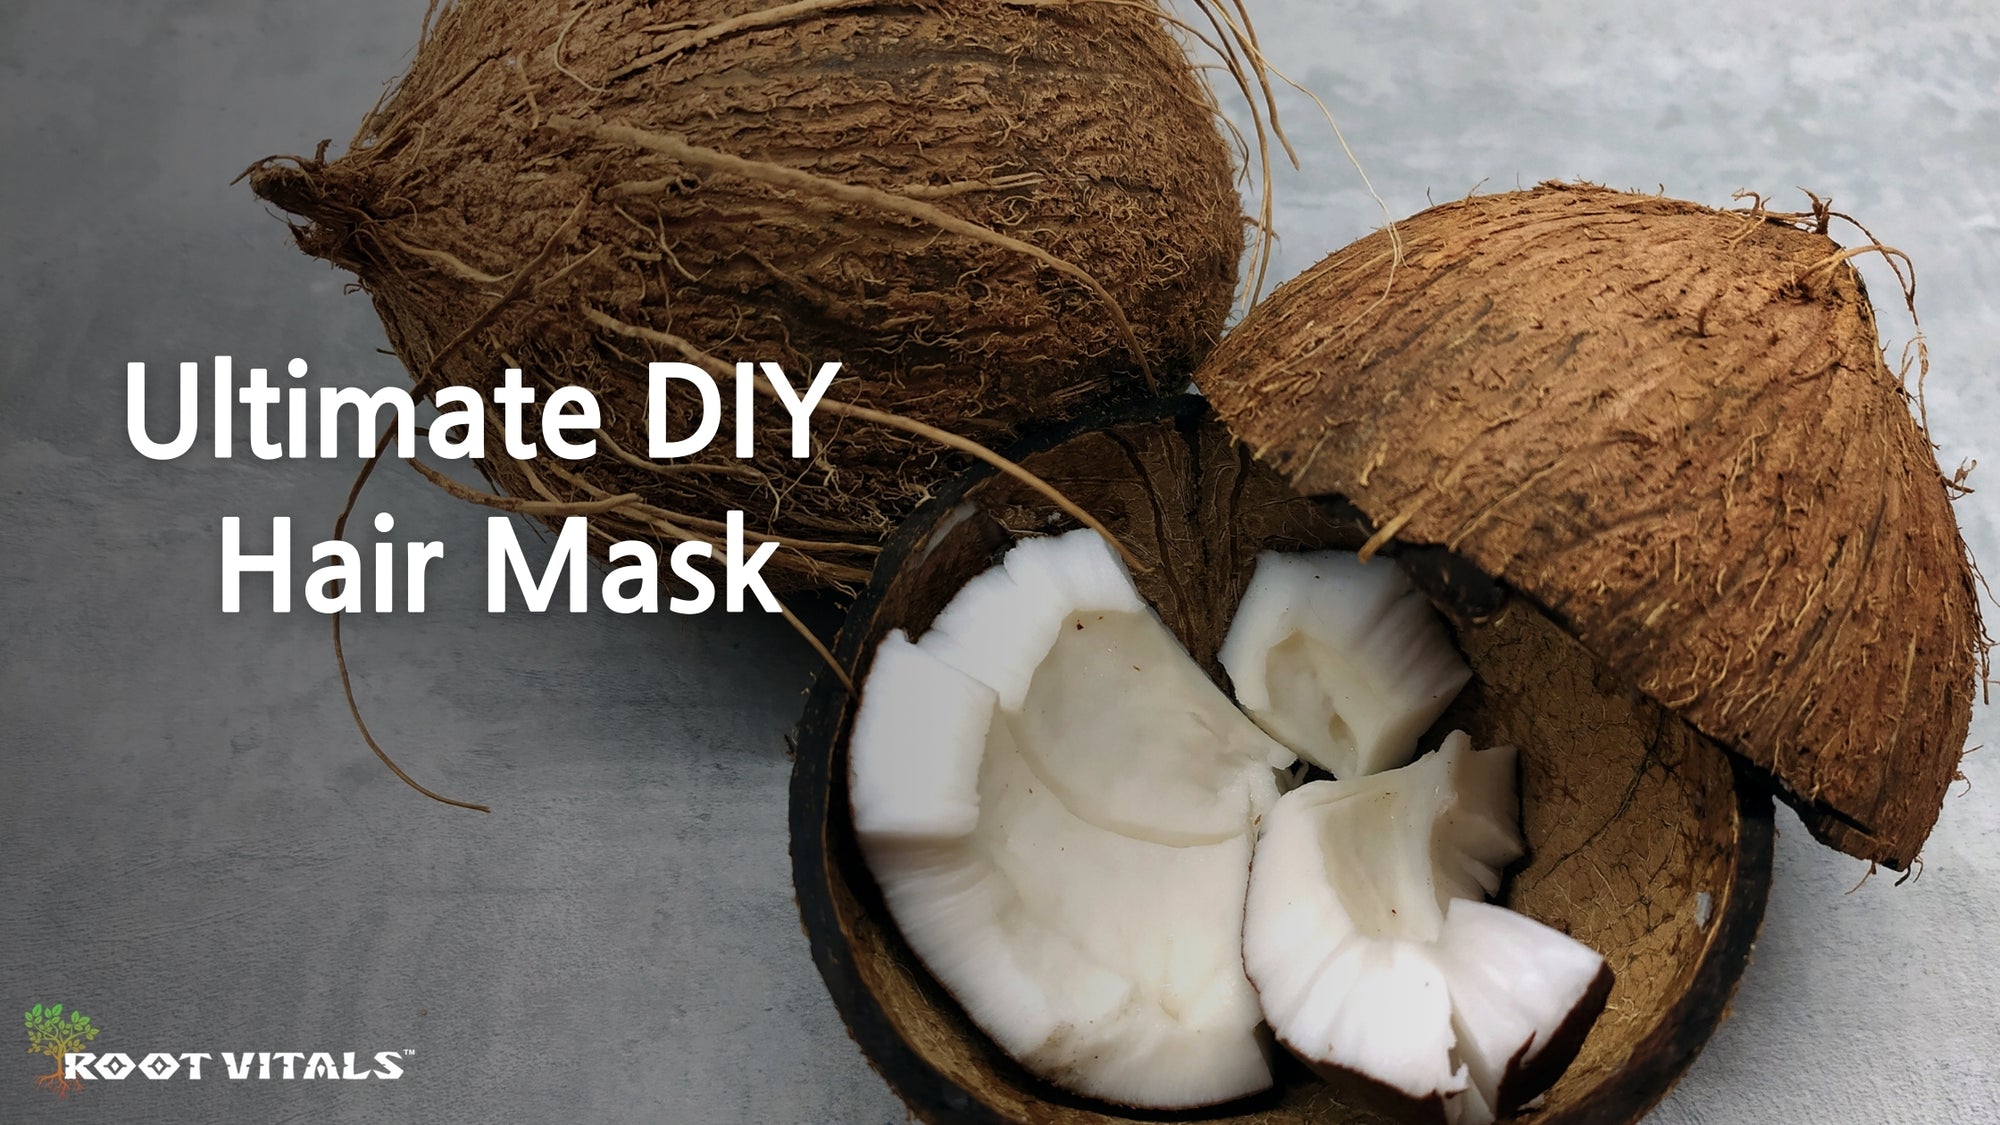 DIY Hair Mask using best natural products